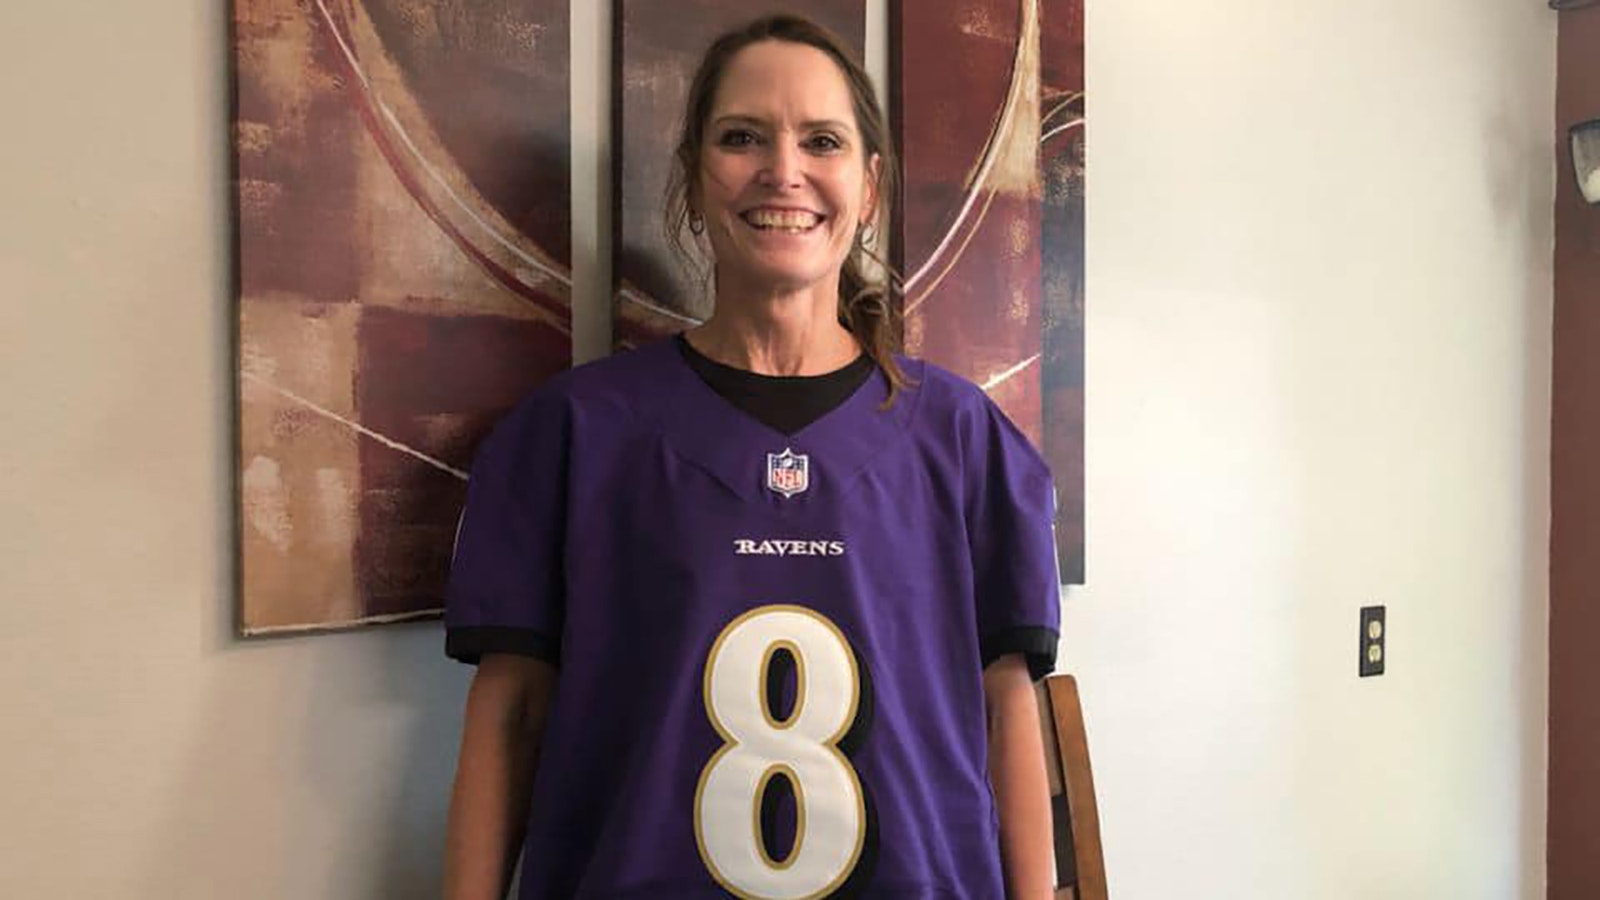 Mary Axthelm of Riverton was one of the first people honored by Dreams in Motion. She is pictured in her authentic game-day jersey.